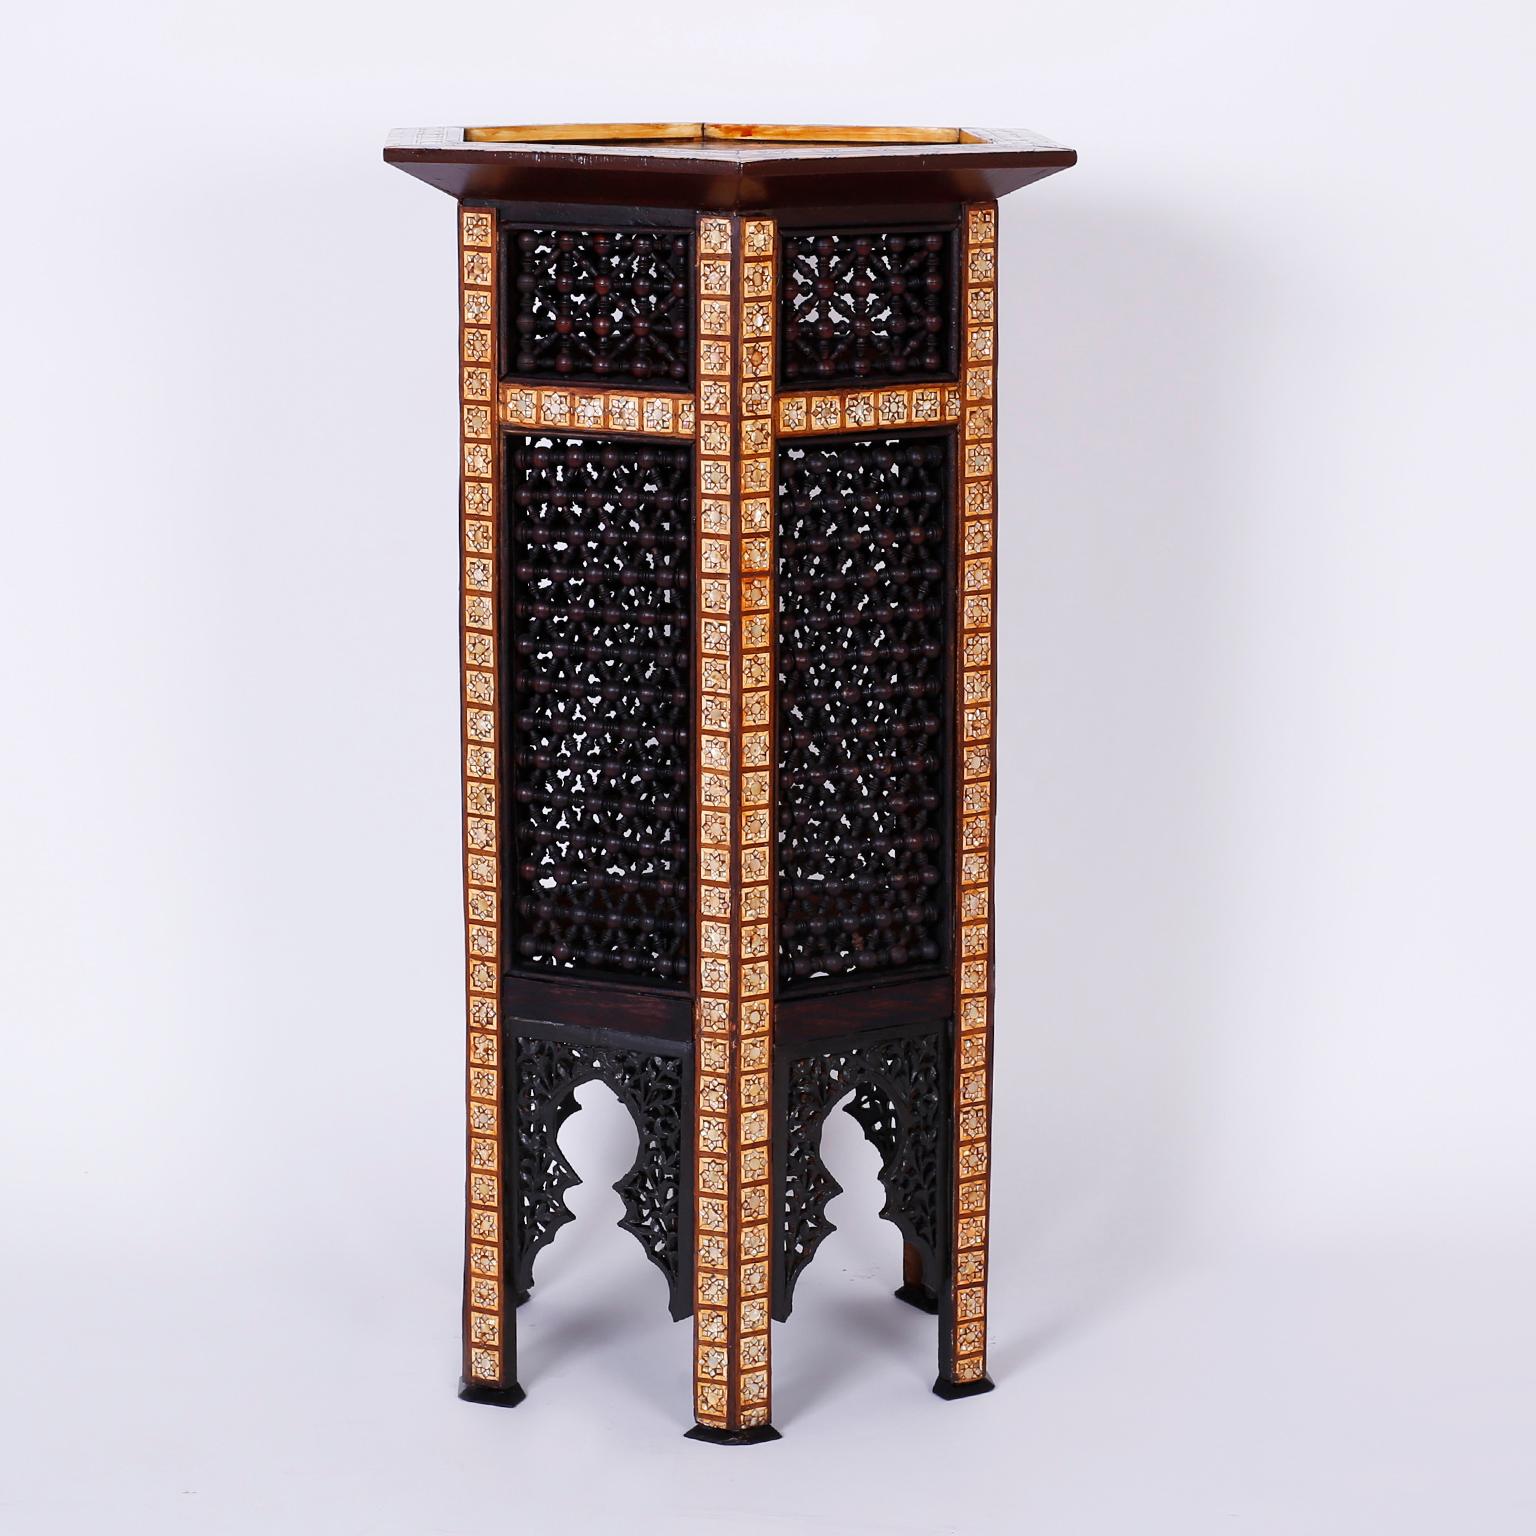 Pedestal crafted with exotic hardwoods such as mahogany, king wood and ebony. The hexagon top features interlocking geometric designs in mother of pearl. The six sided base has stick and ball panels bordered by mother of pearl stars over Moorish